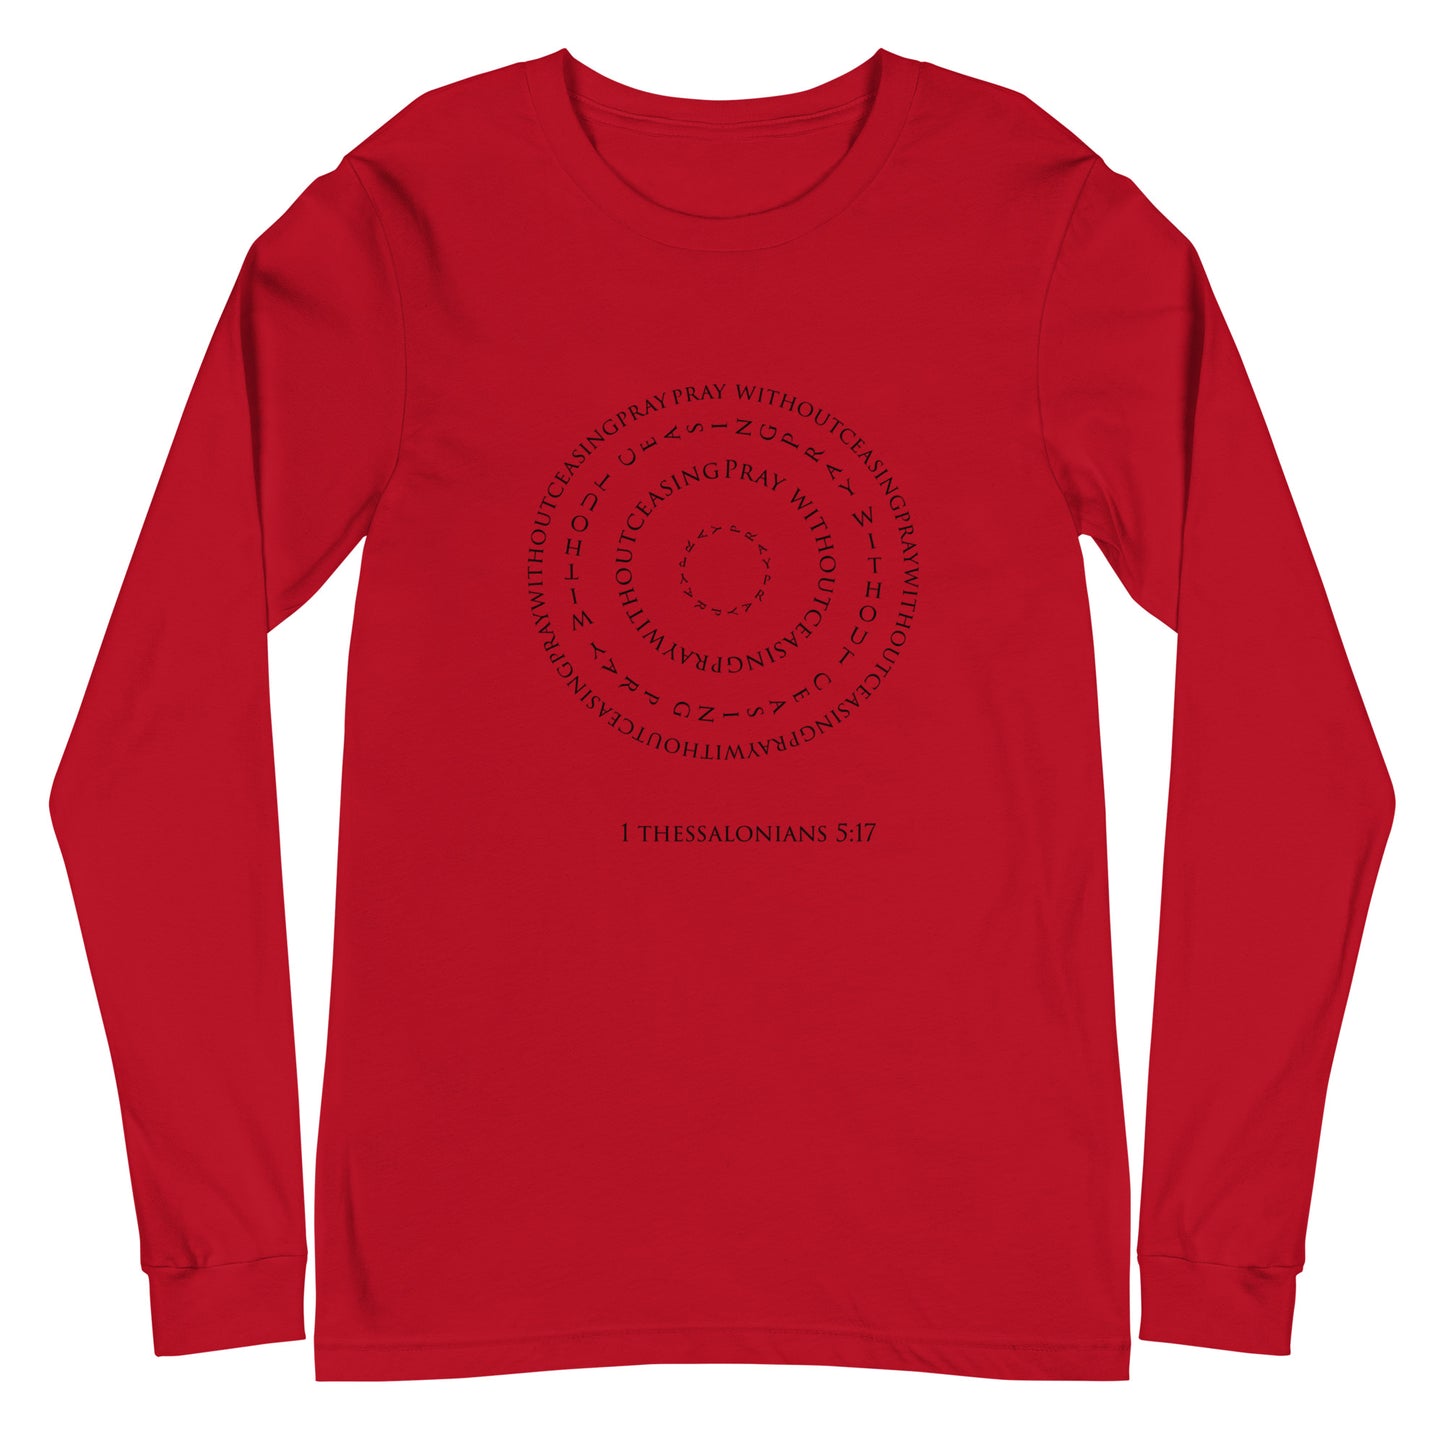 Graphic Christian red long-sleeve tee with 1 Thessalonians 5:17 on it. This piece of Christian apparel is a reminder the power of prayer. Grab this unique long-sleeve tee from the Christian-based company Olive Grove Life.